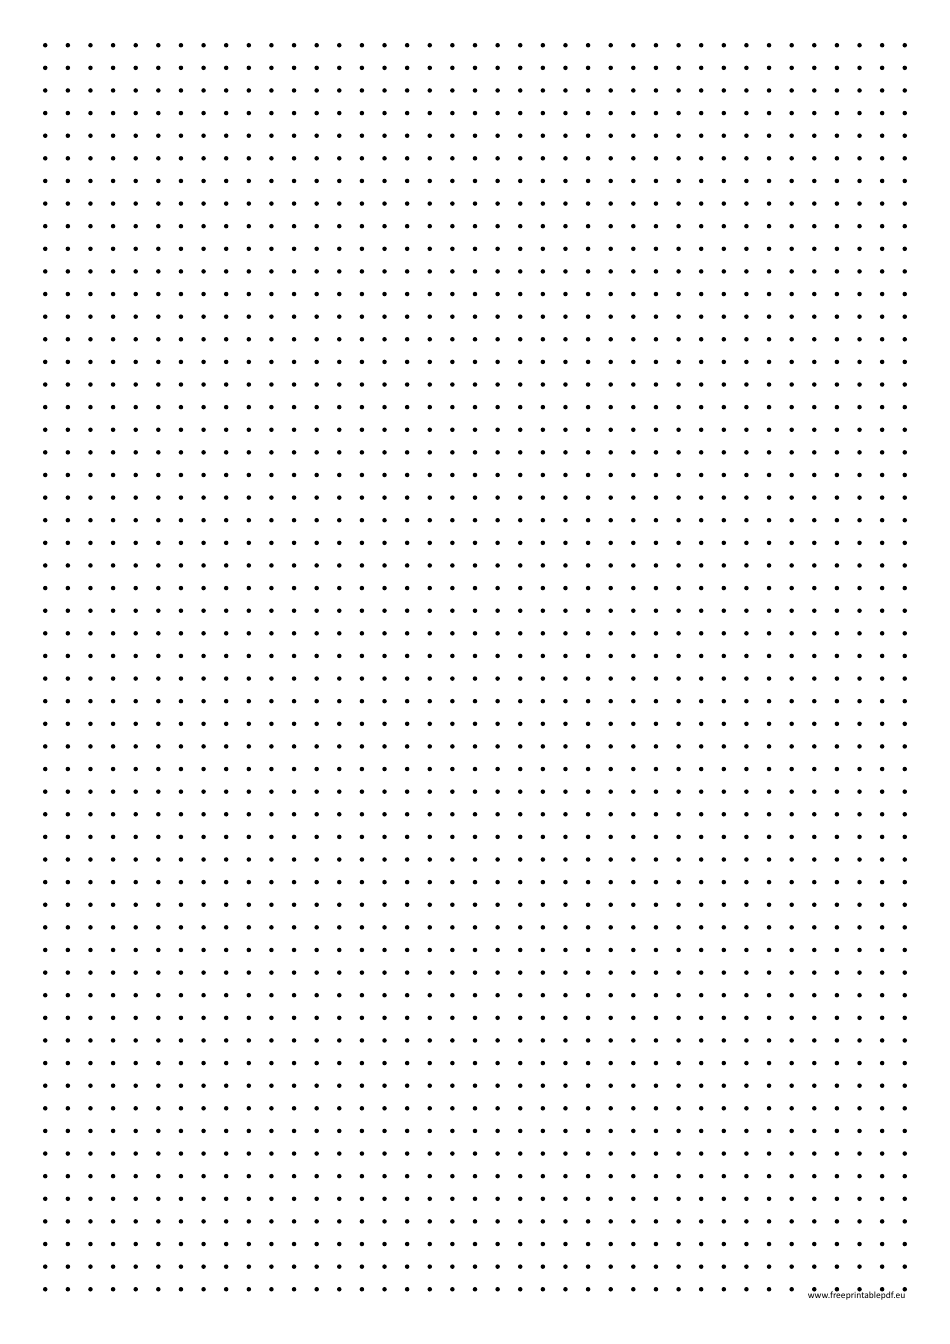 5mm Dot Grid Paper Template - Printable Free Download